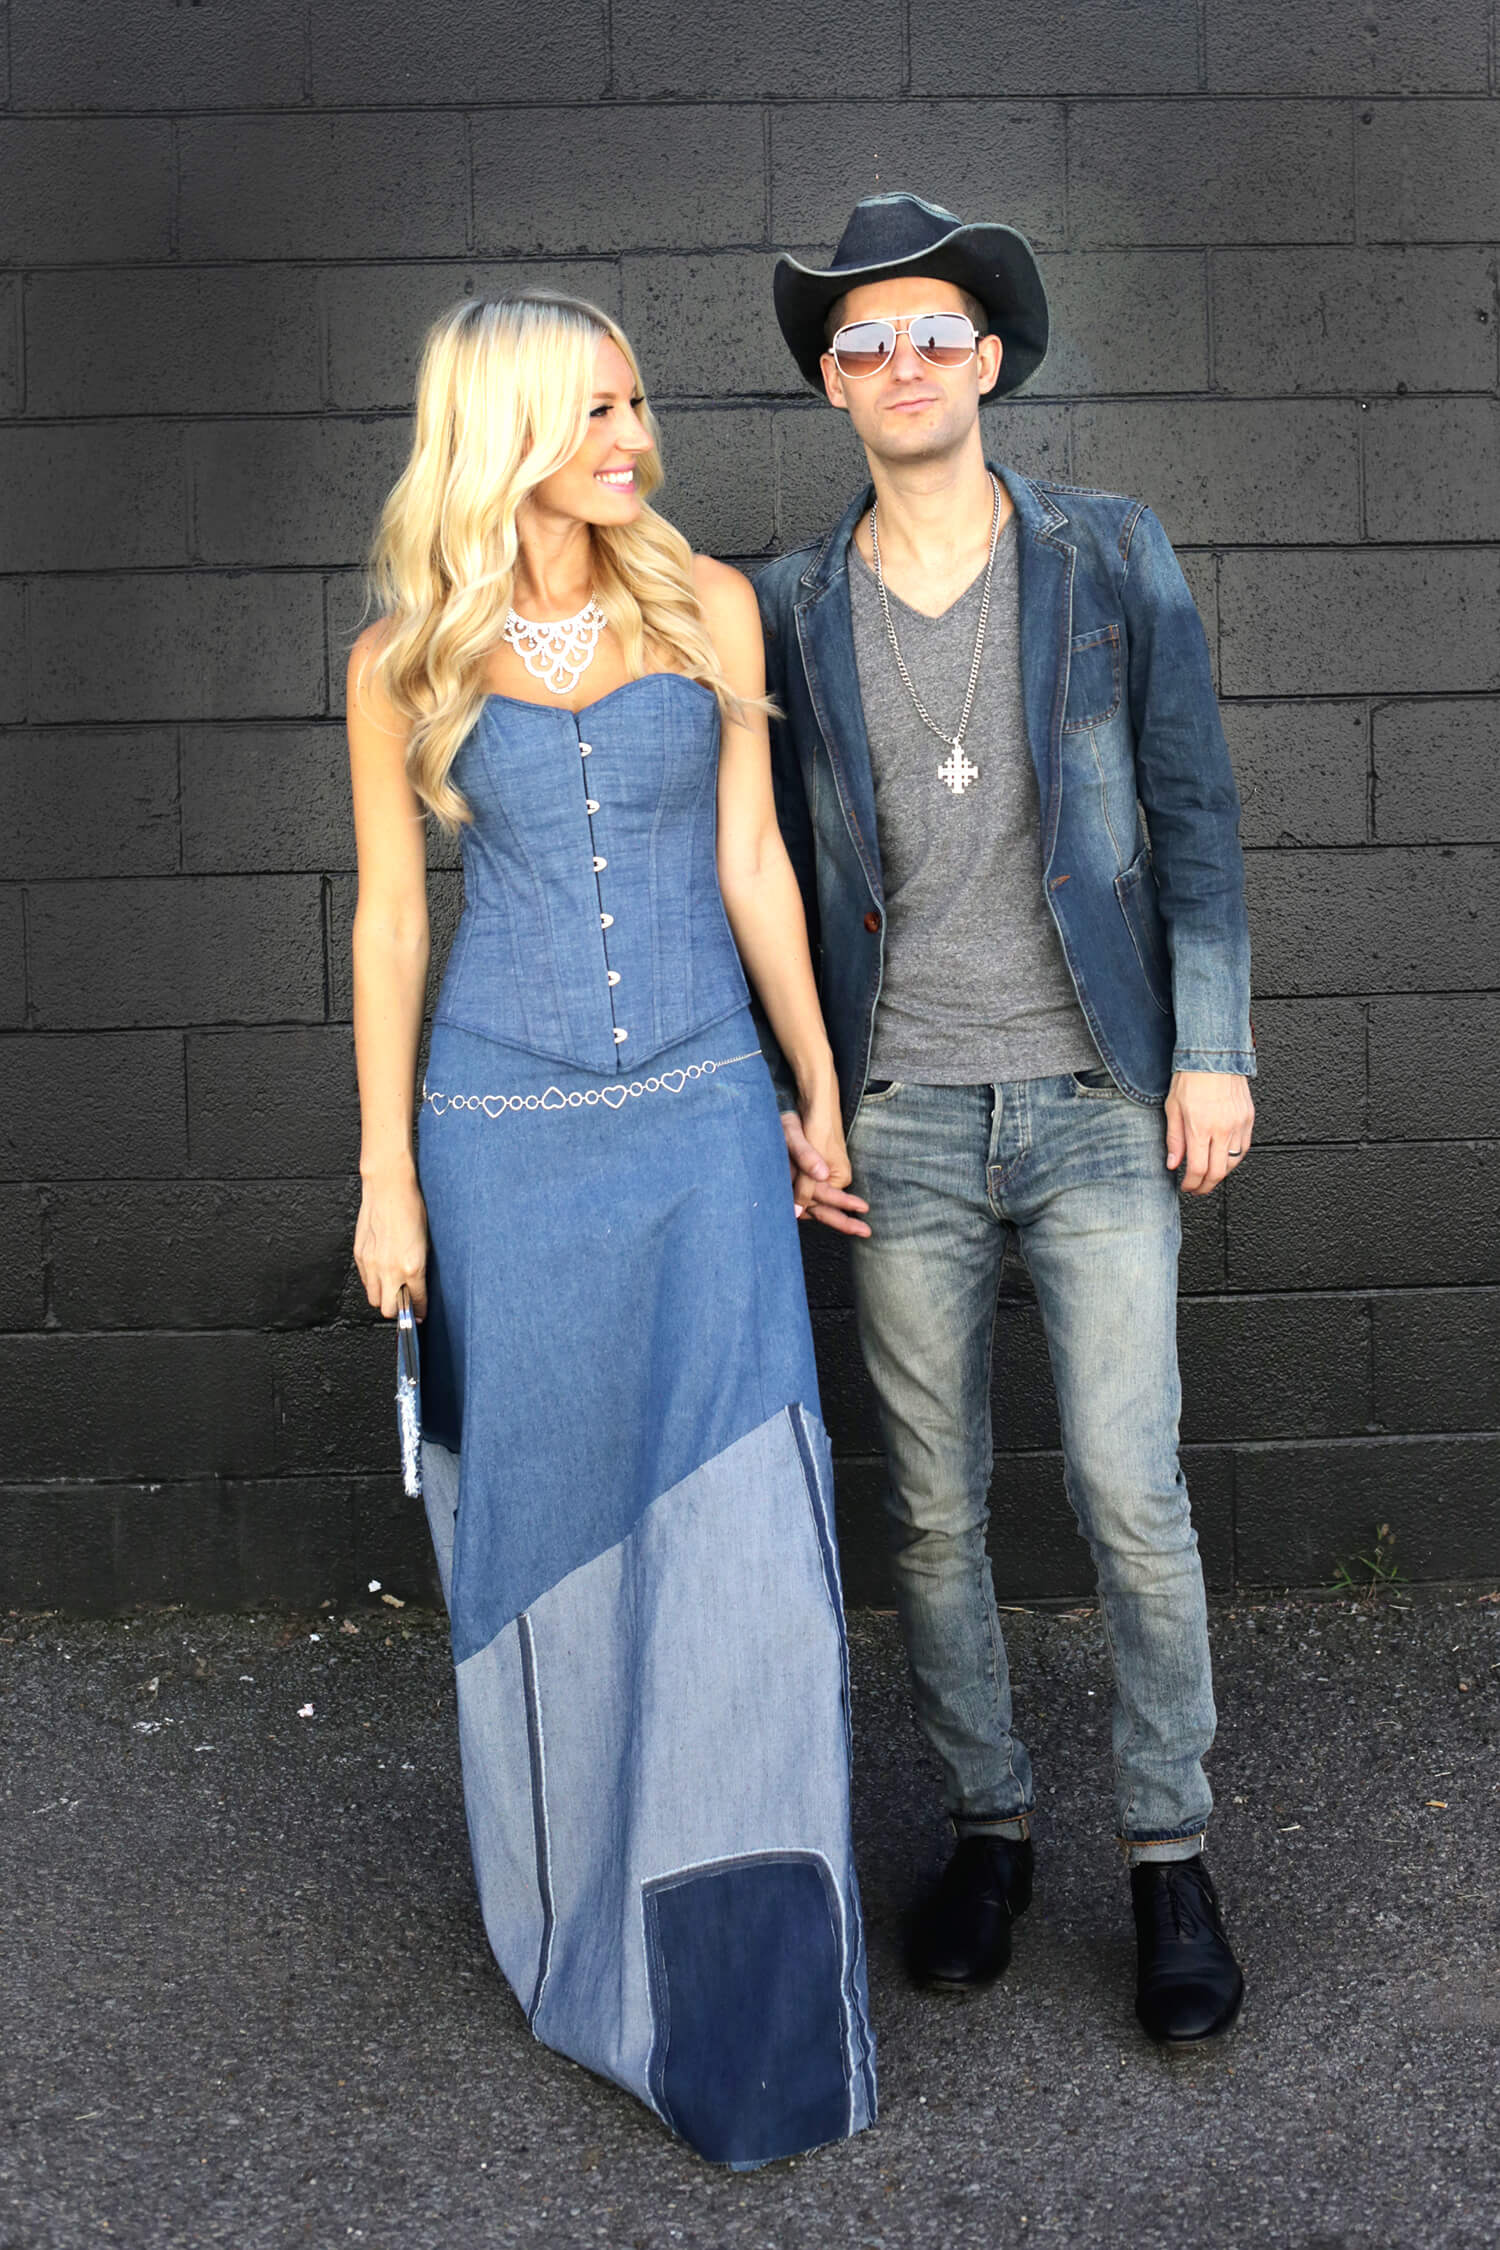 Couple's Costume- Britney and Justin (The Denim Outfits!) Click through for more!